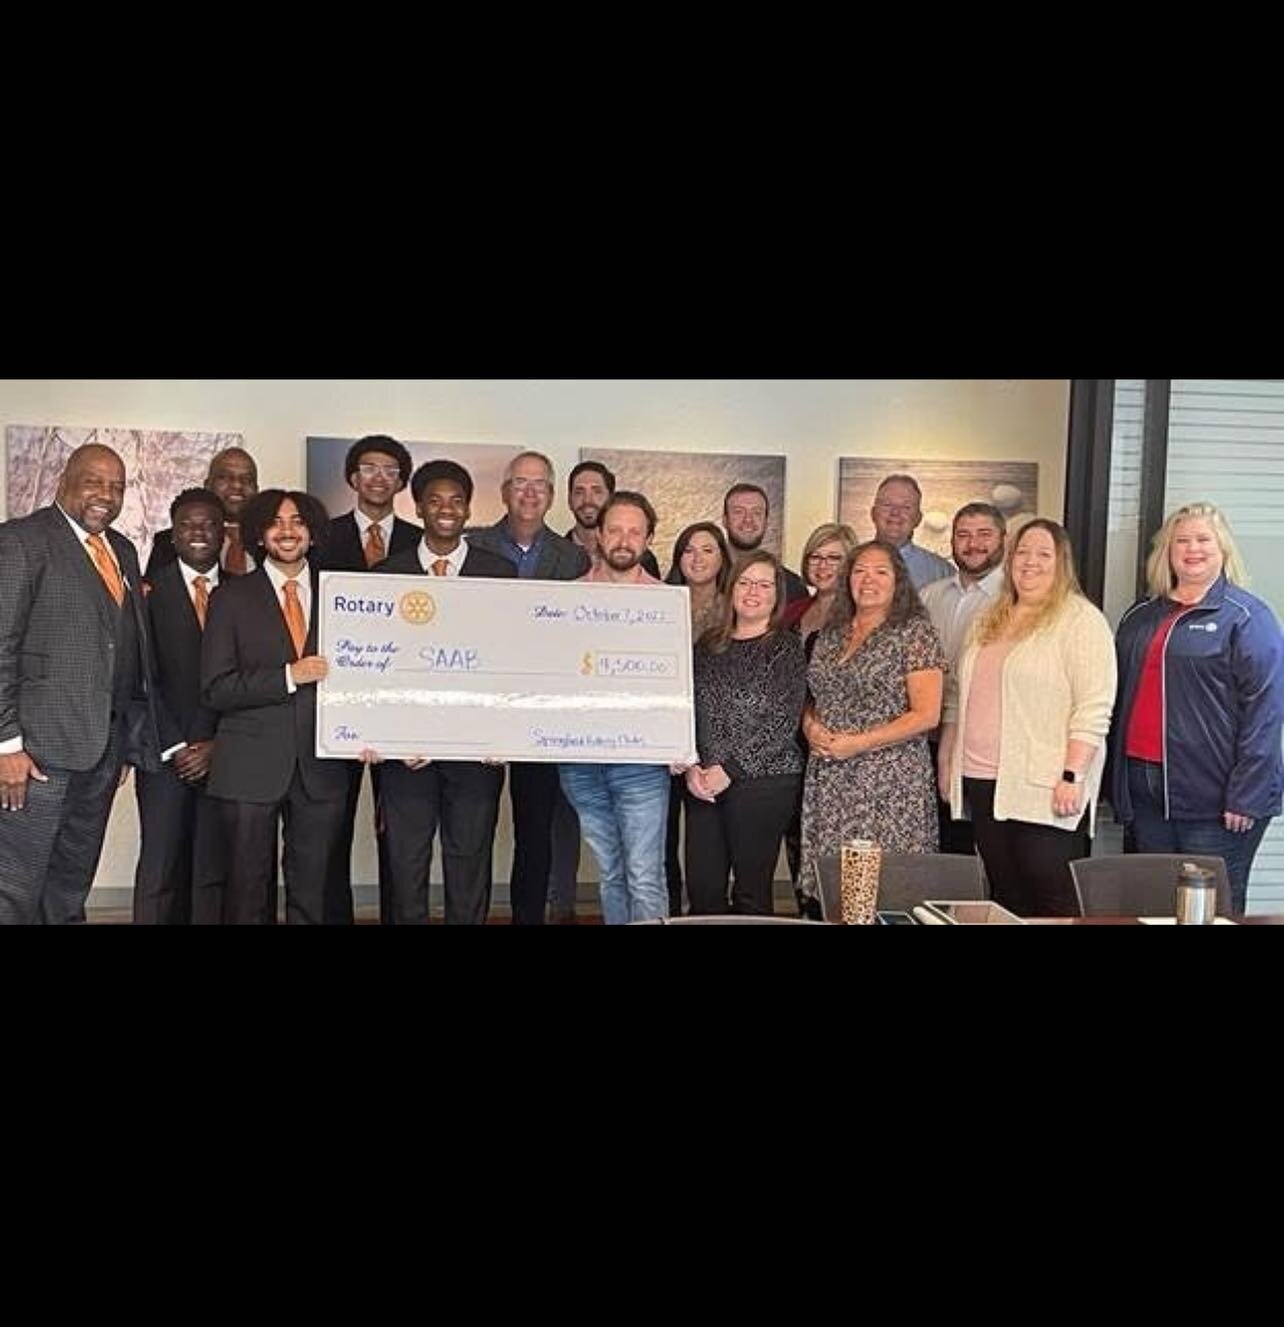 The Presidents Council for the six Rotary Clubs of Springfield was proud to renew our partnership with the Student African American Brotherhood (SAAB), which is a national organization based in Springfield providing education-to-career support for yo